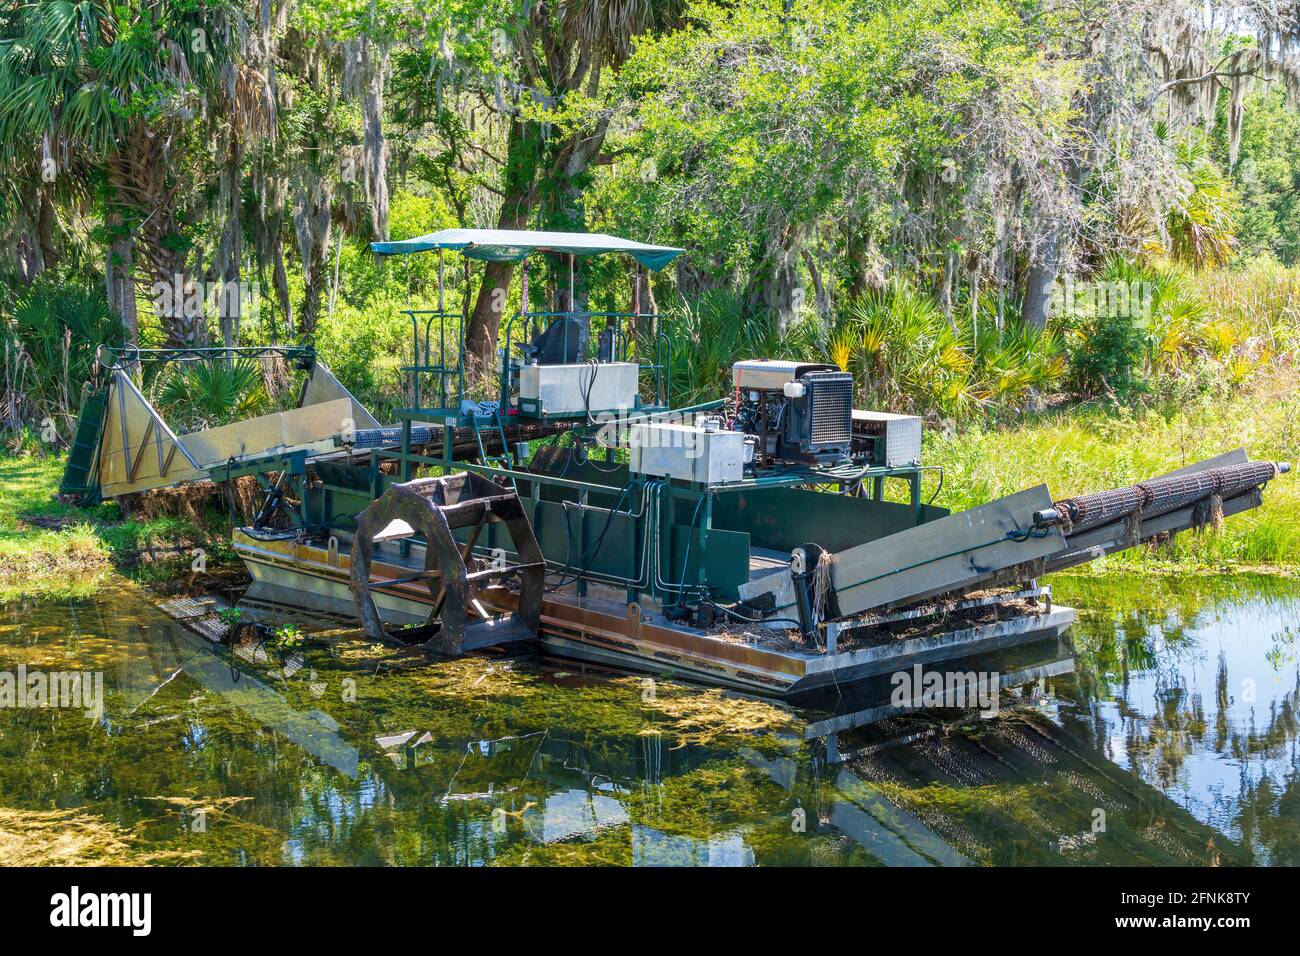 Aquatic weed harvester - Cooter Pond Park, Inverness, Florida, USA Stock Photo